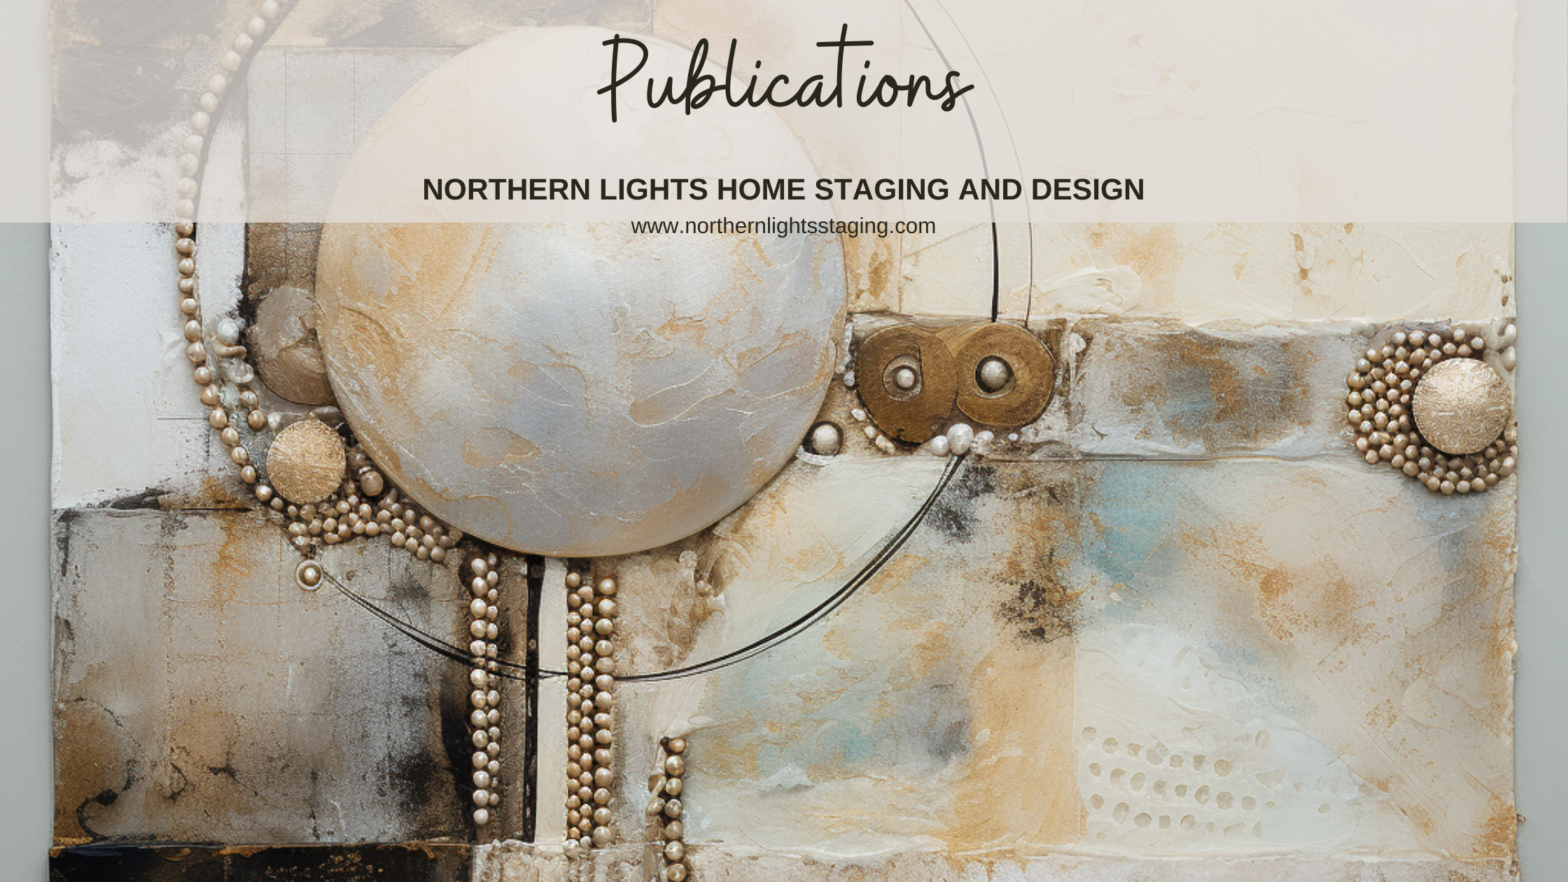 Publications of Northern Lights Home Staging and Design